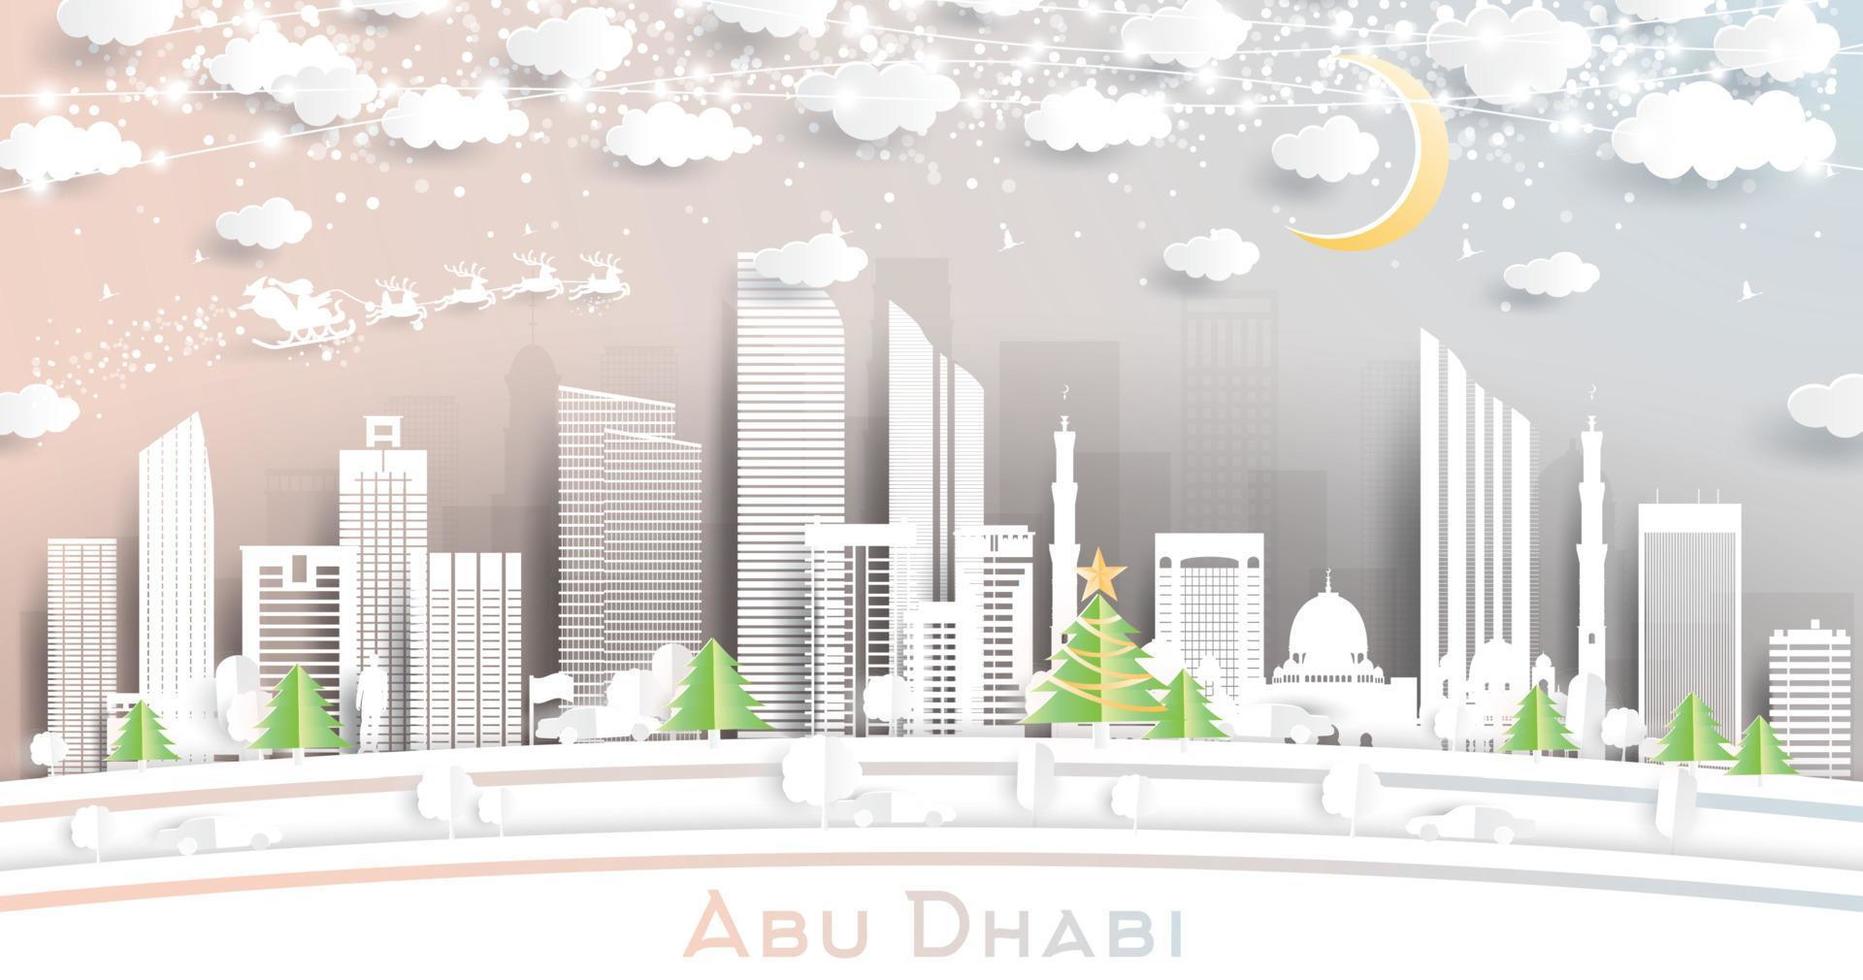 Abu Dhabi United Arab Emirates City Skyline in Paper Cut Style with Snowflakes, Moon and Neon Garland. vector